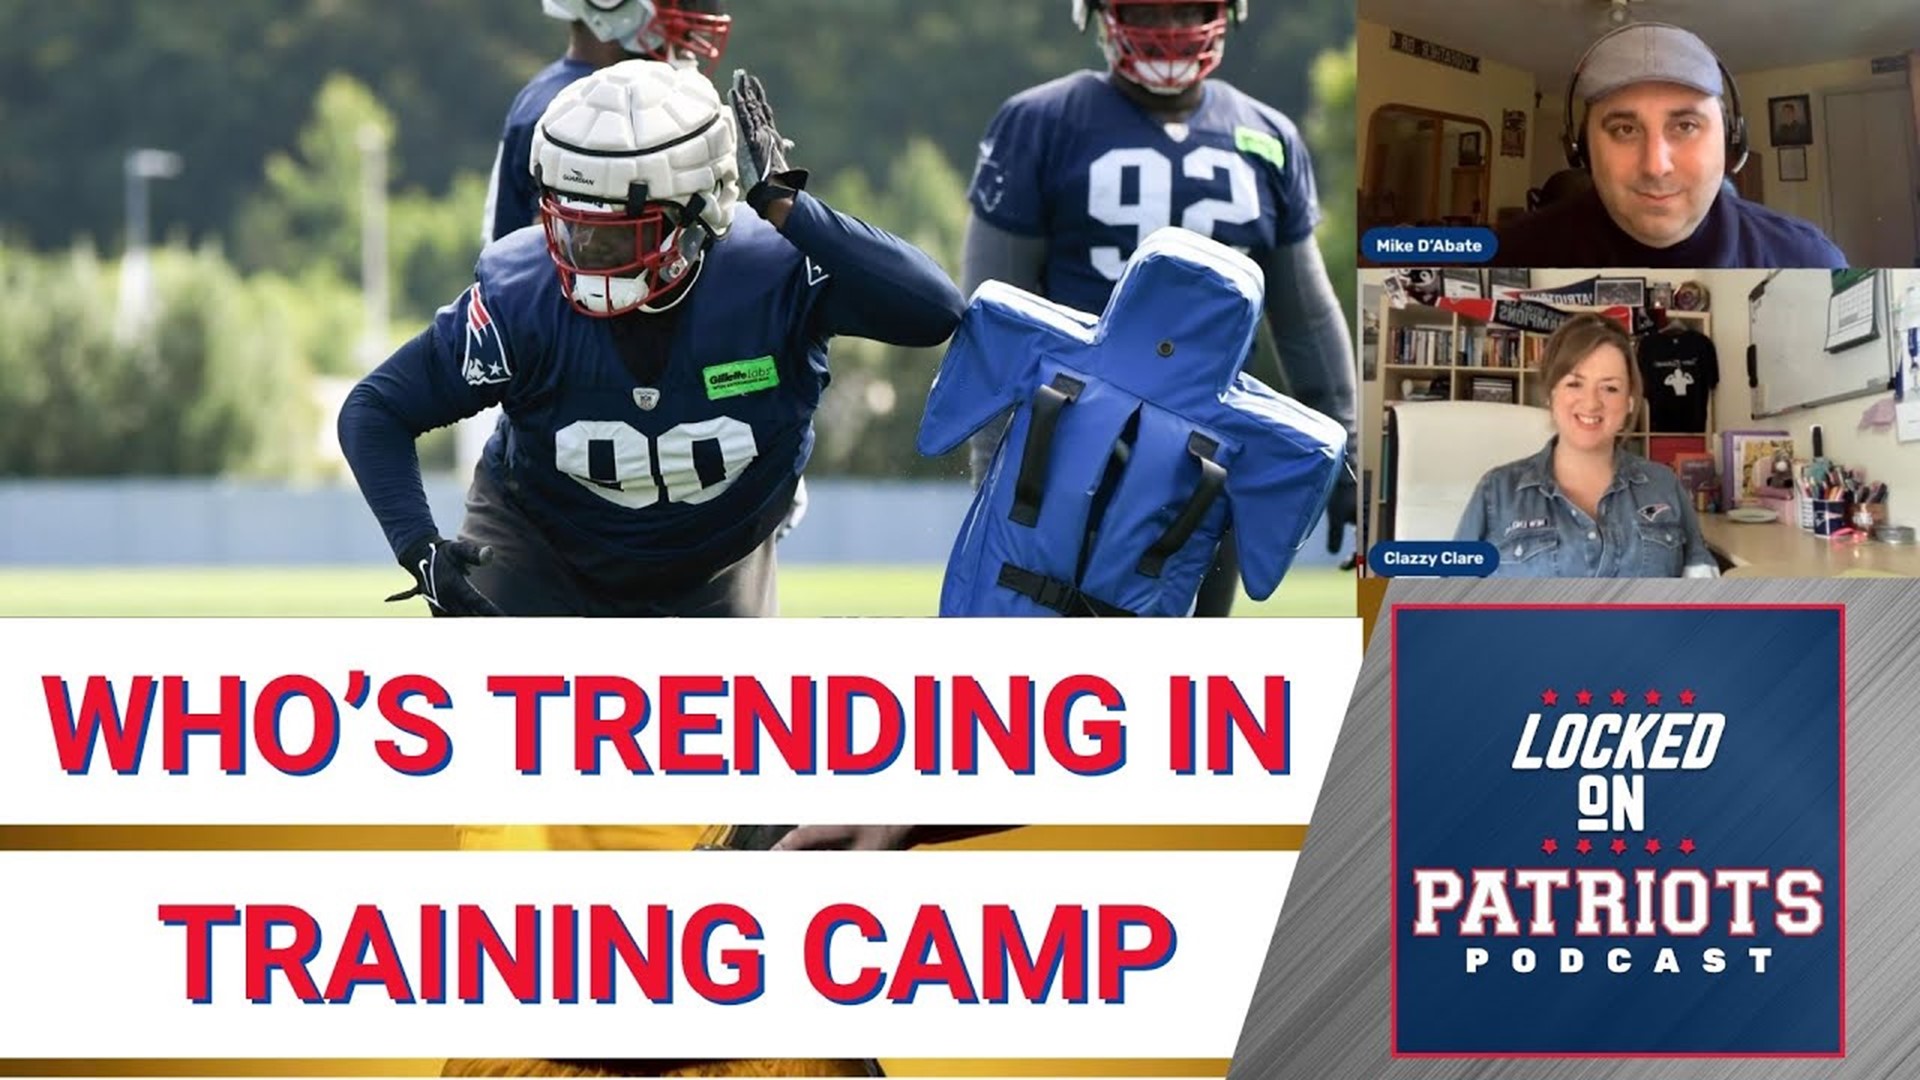 With two days of padded training camp practices in the books, some members of New England Patriots are beginning to stand out above the rest.